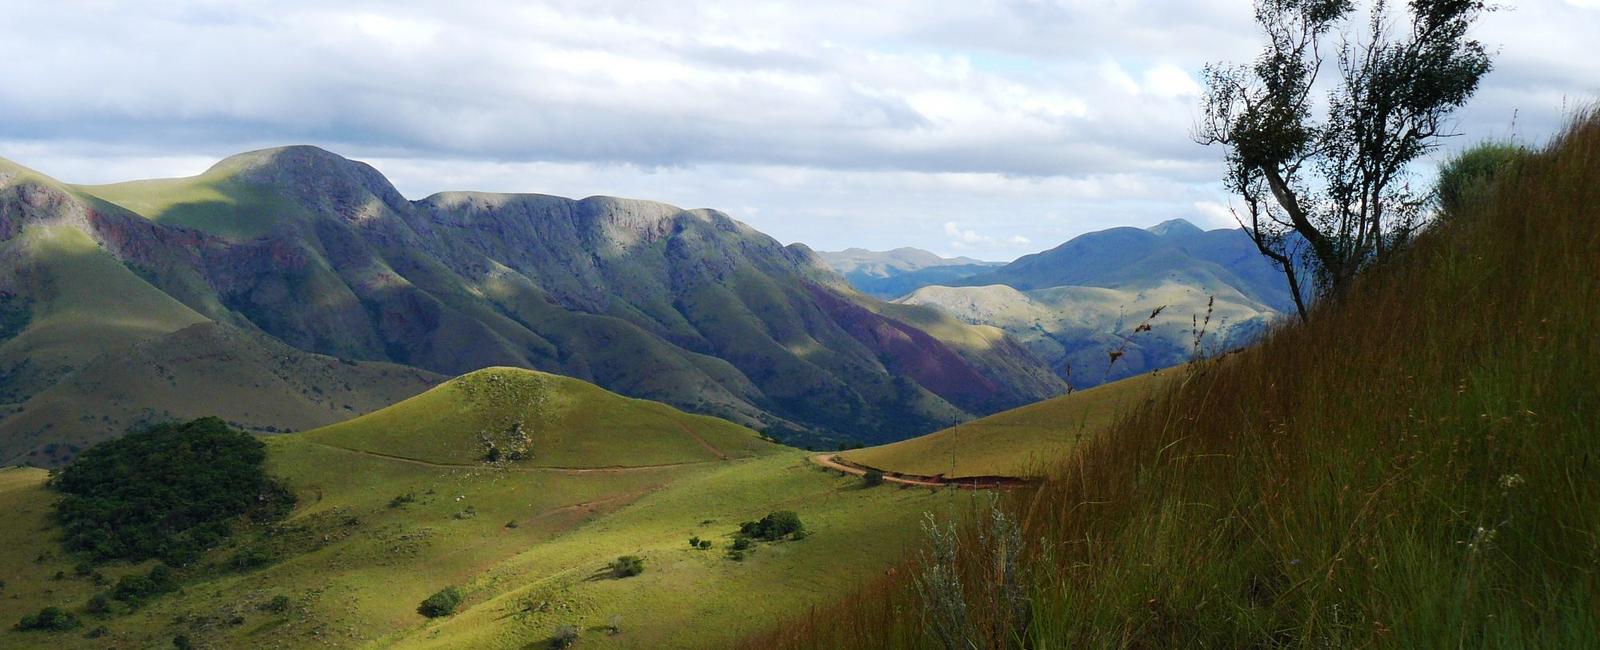 The world s oldest mountain range is in south africa the barberton greenstone belt dates back 3 5 billion years